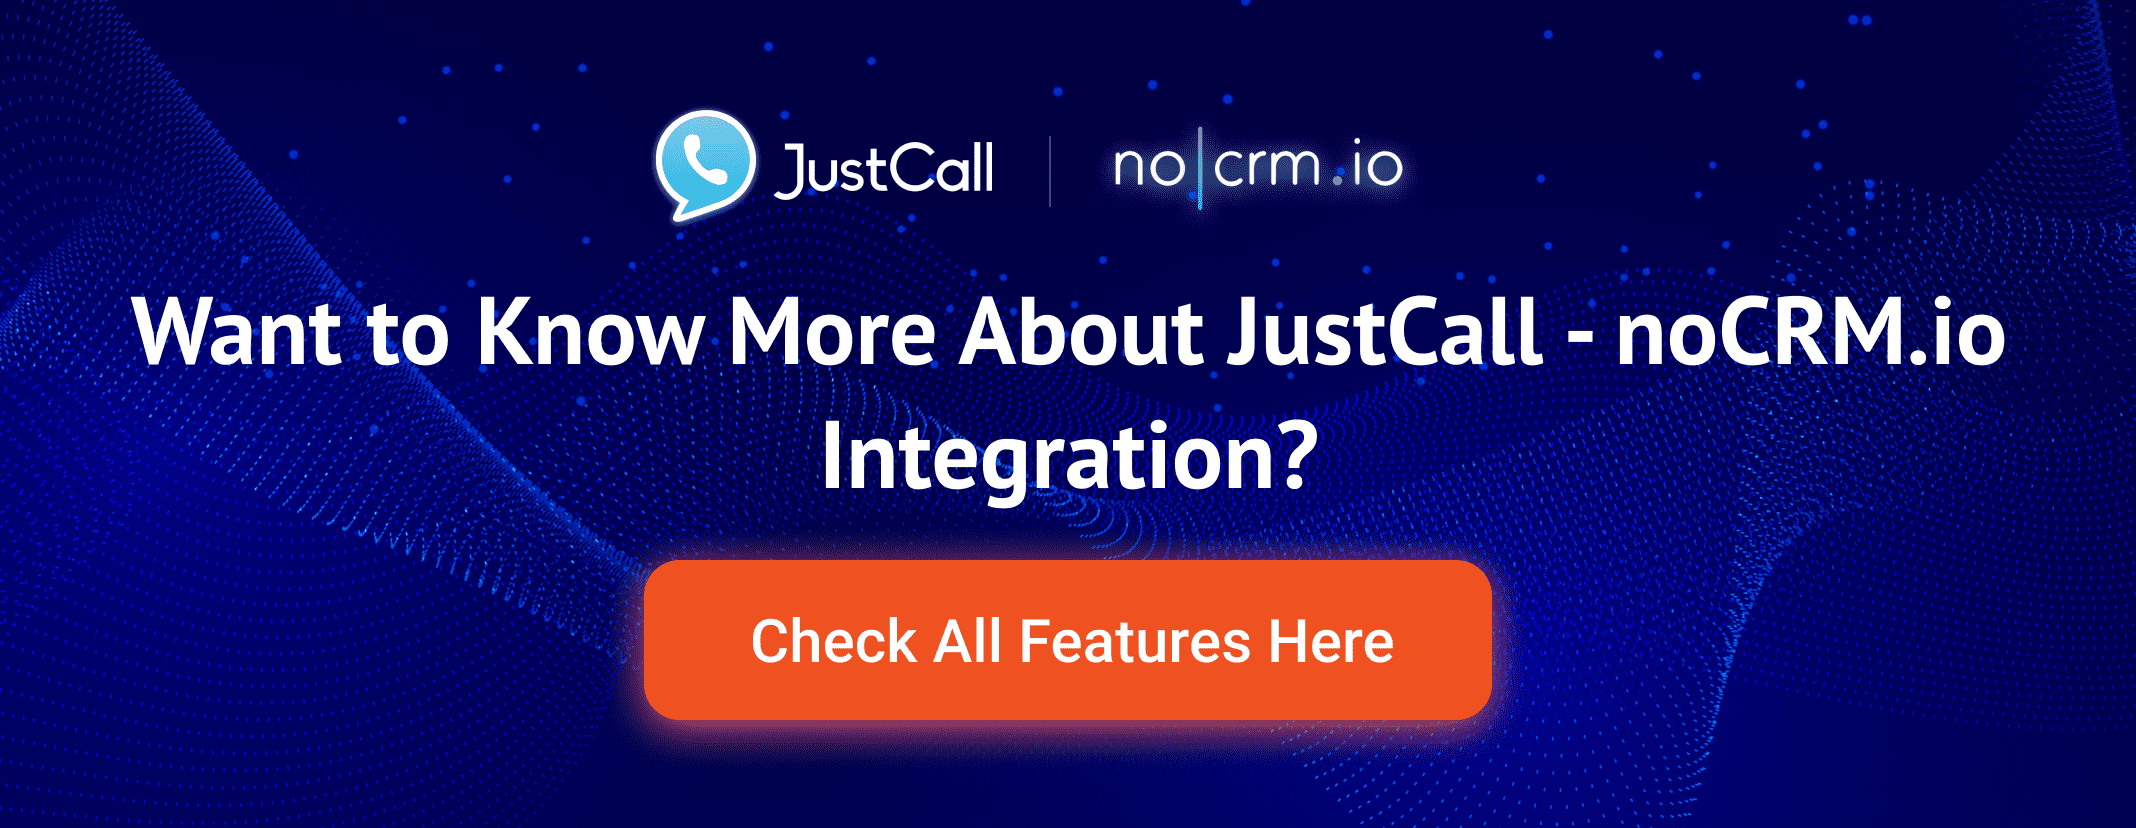 JustCall-noCRM.io-Phone-Integration